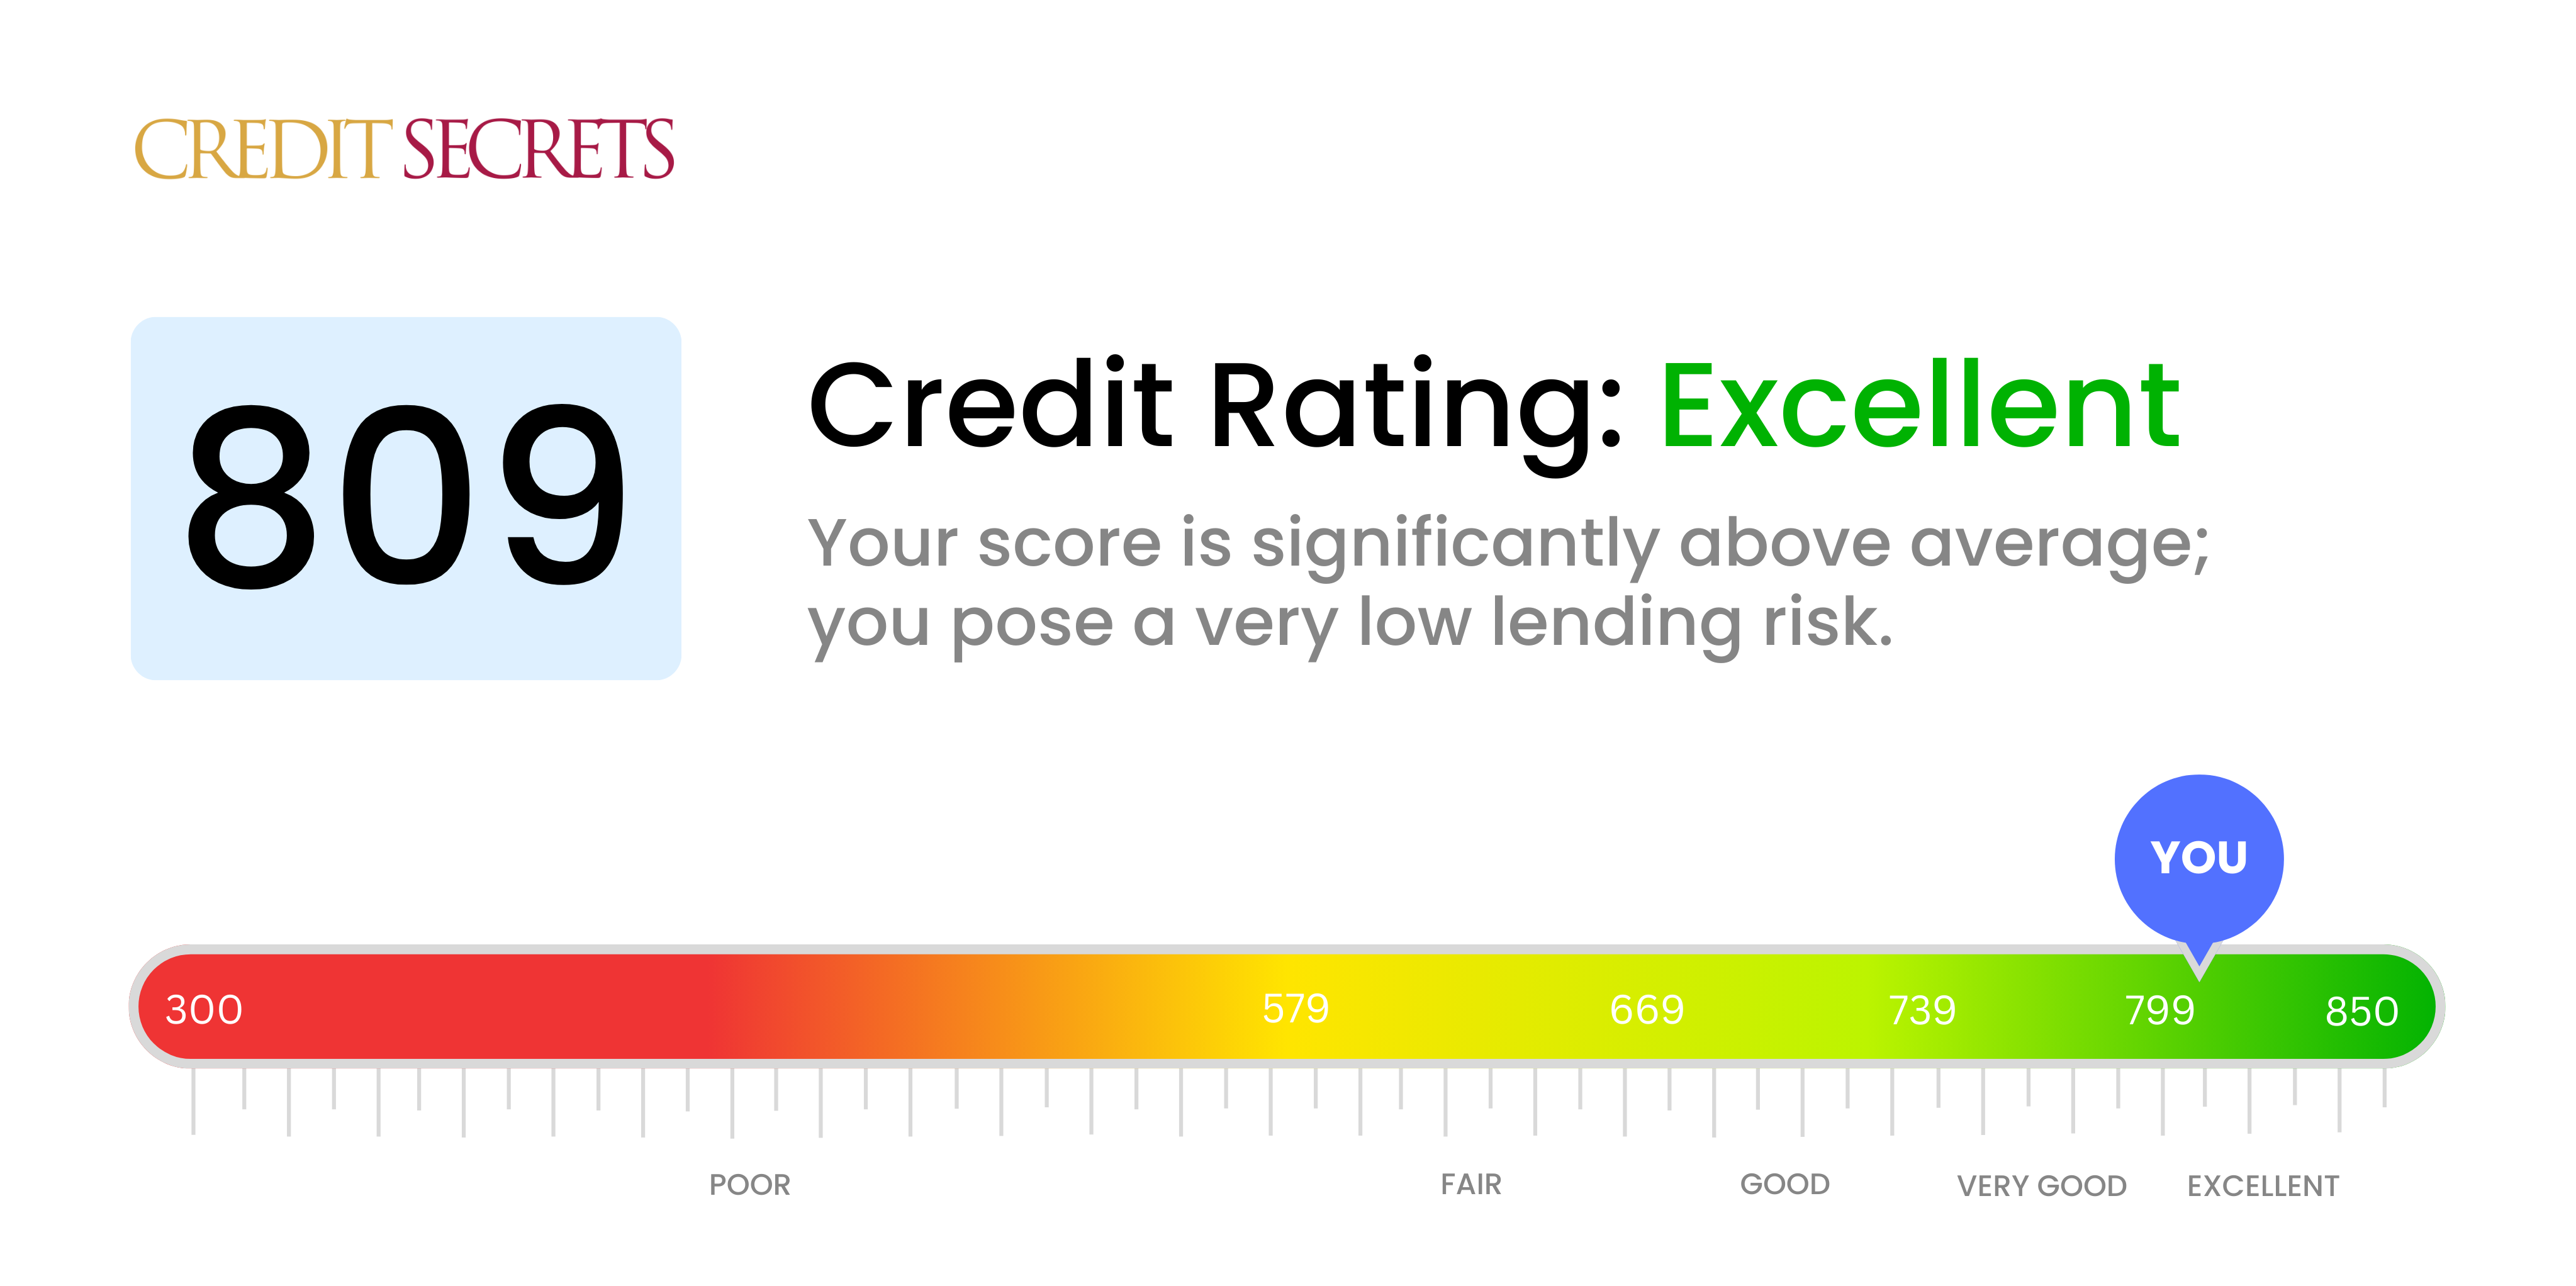 Is 809 a good credit score?